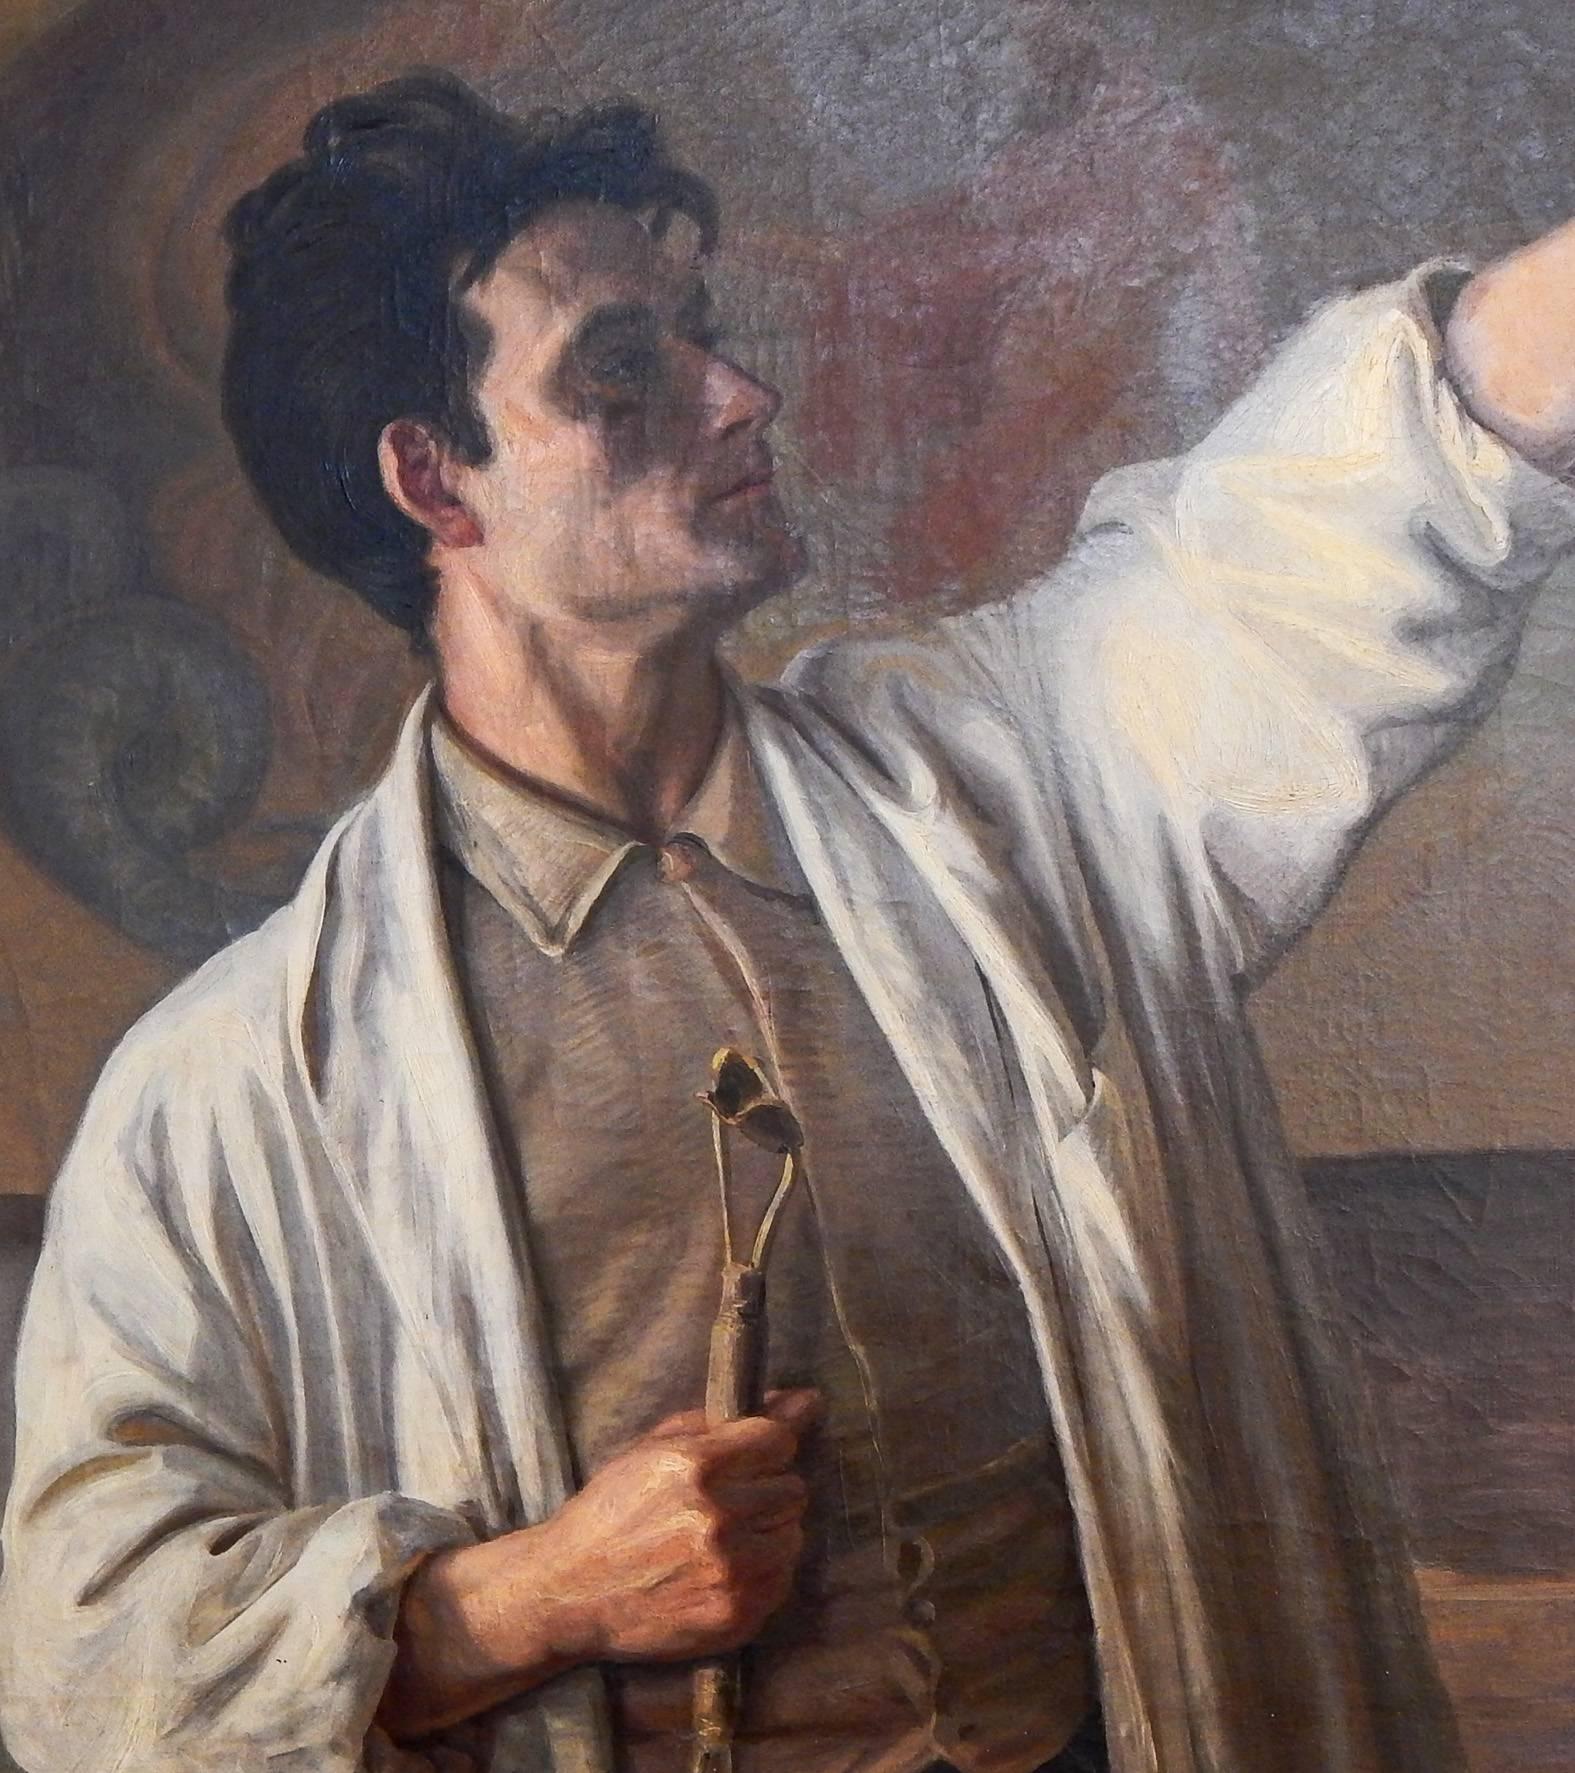 Brilliantly capturing the intensity and artistry of the sculptor at work, this large and important painting by Oscar Matthiesen depicts his subject with wild, unkempt hair and a lean frame. The sculptor has rolled up the sleeves of his artist smock